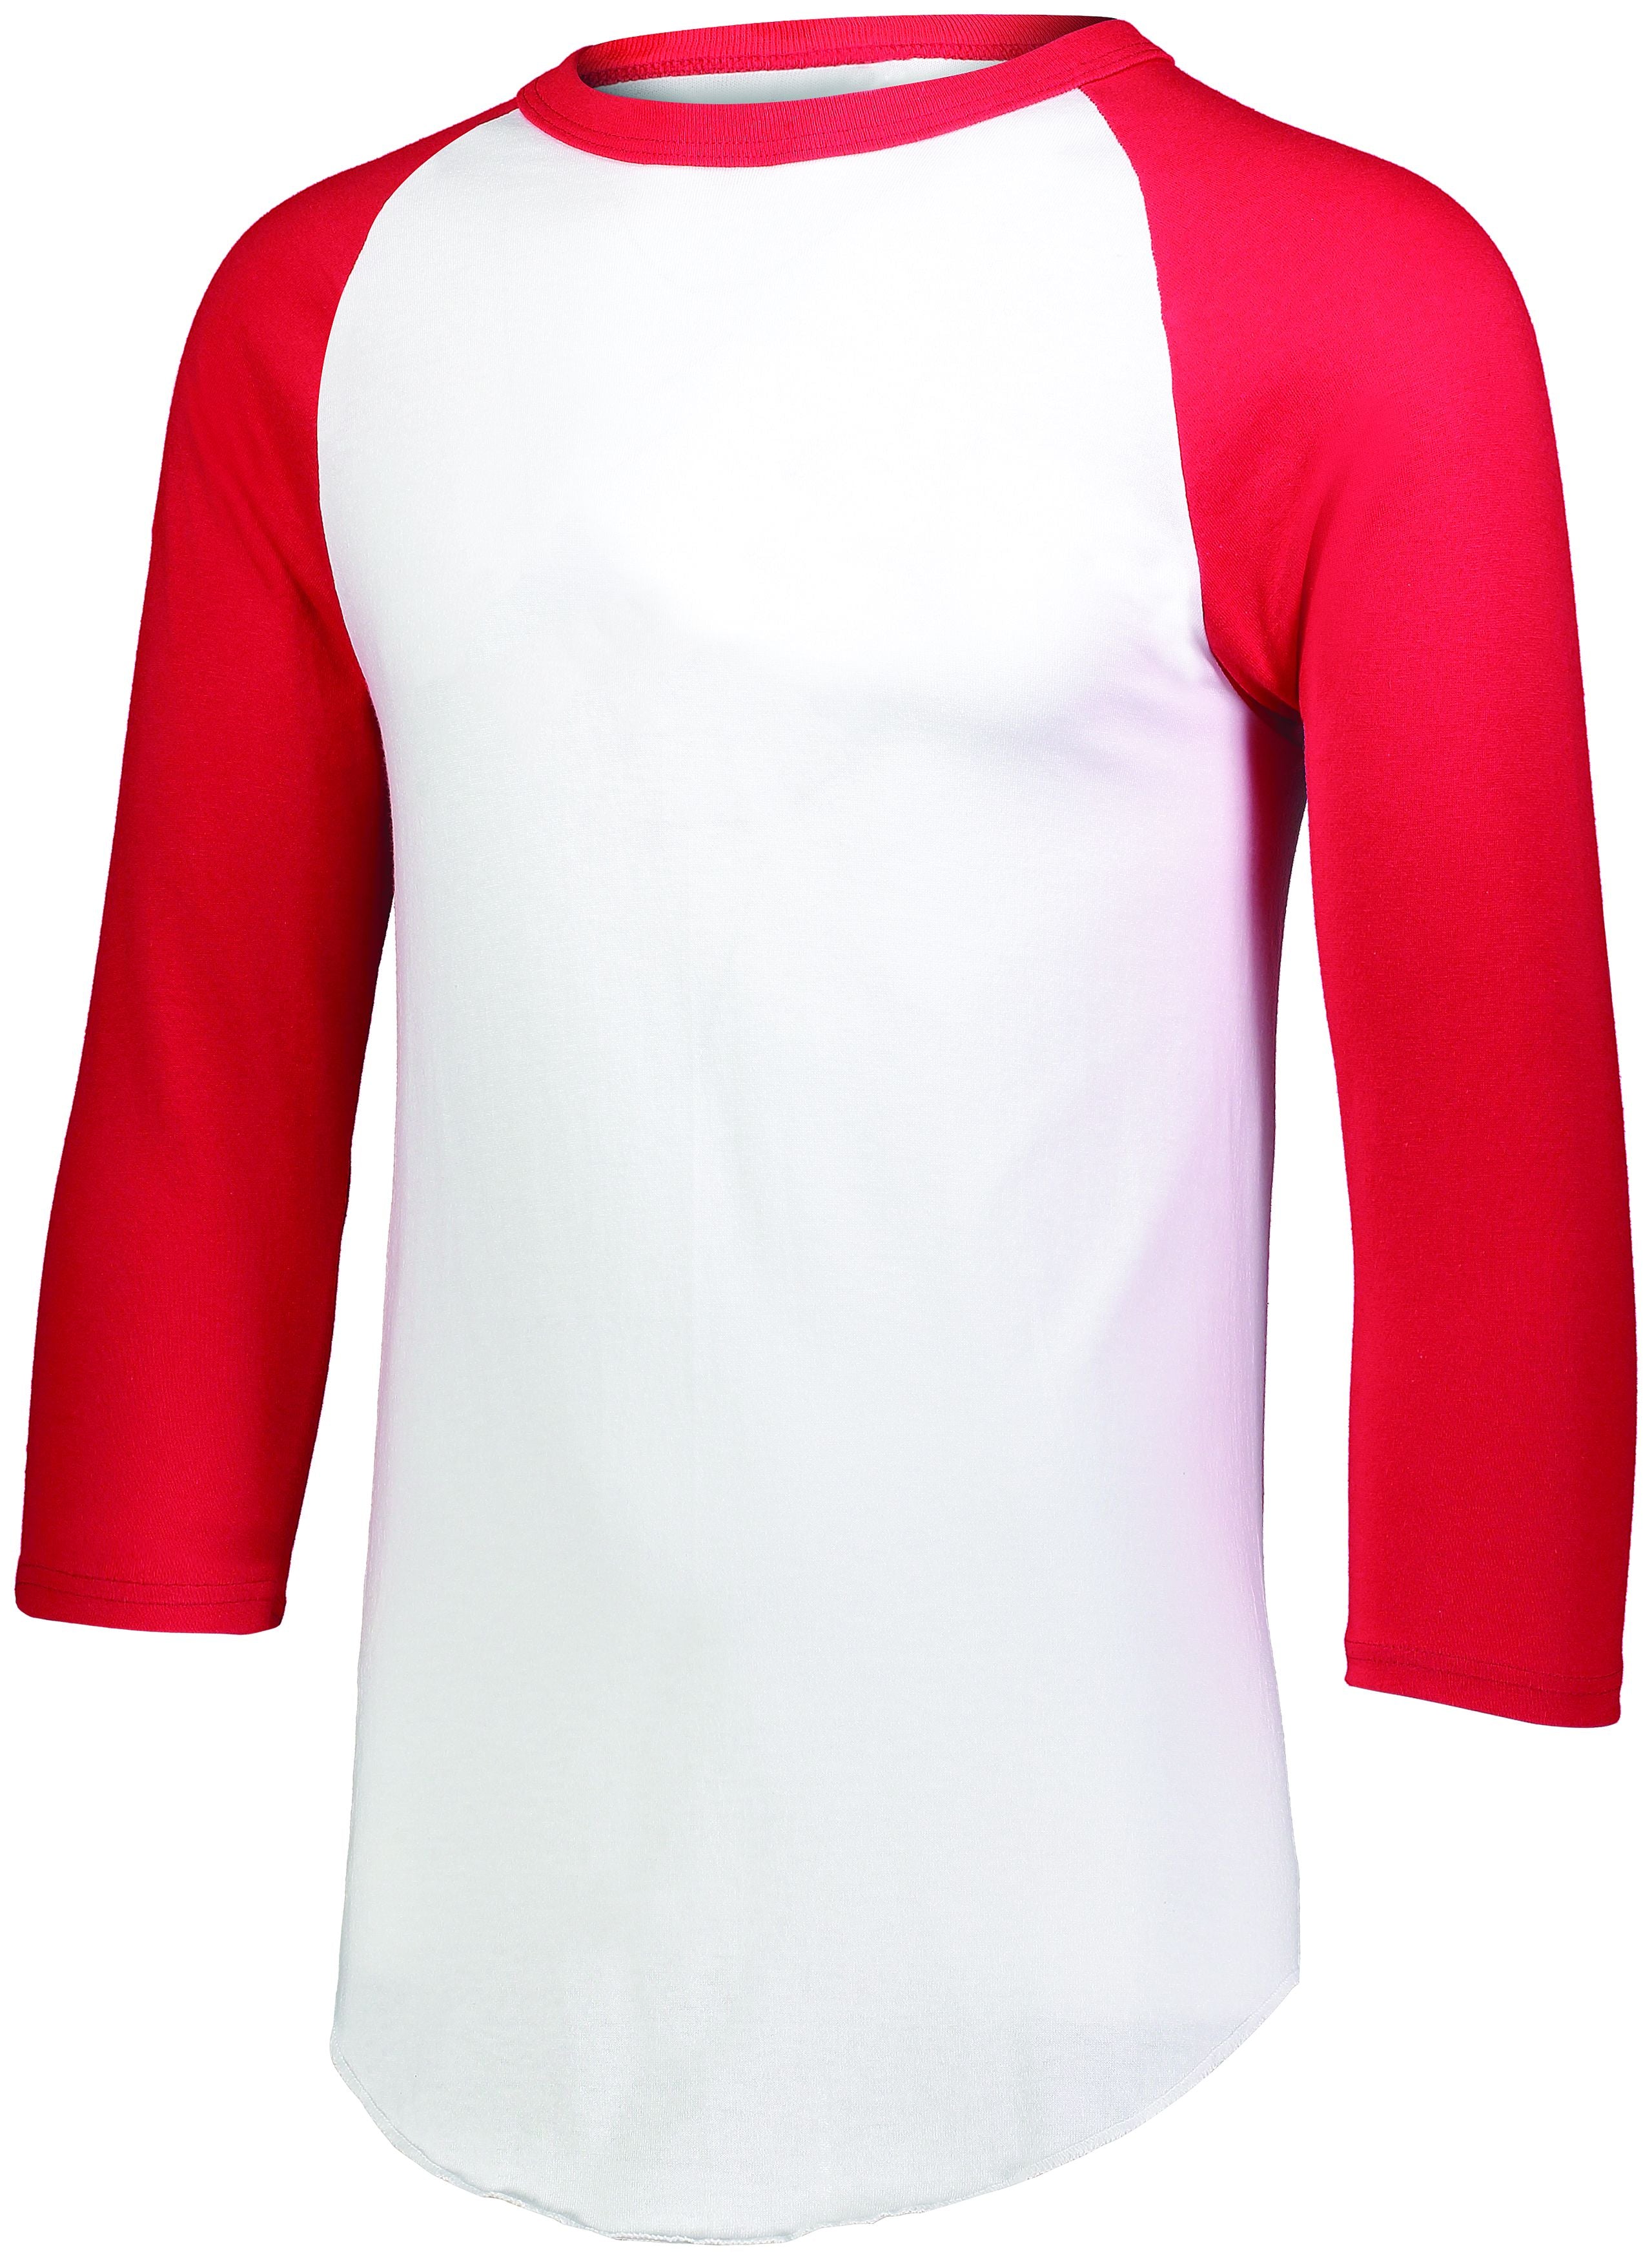 Augusta Sportswear Youth Baseball Jersey 2.0 in White/Red  -Part of the Youth, Youth-Jersey, Augusta-Products, Baseball, Shirts, All-Sports, All-Sports-1 product lines at KanaleyCreations.com